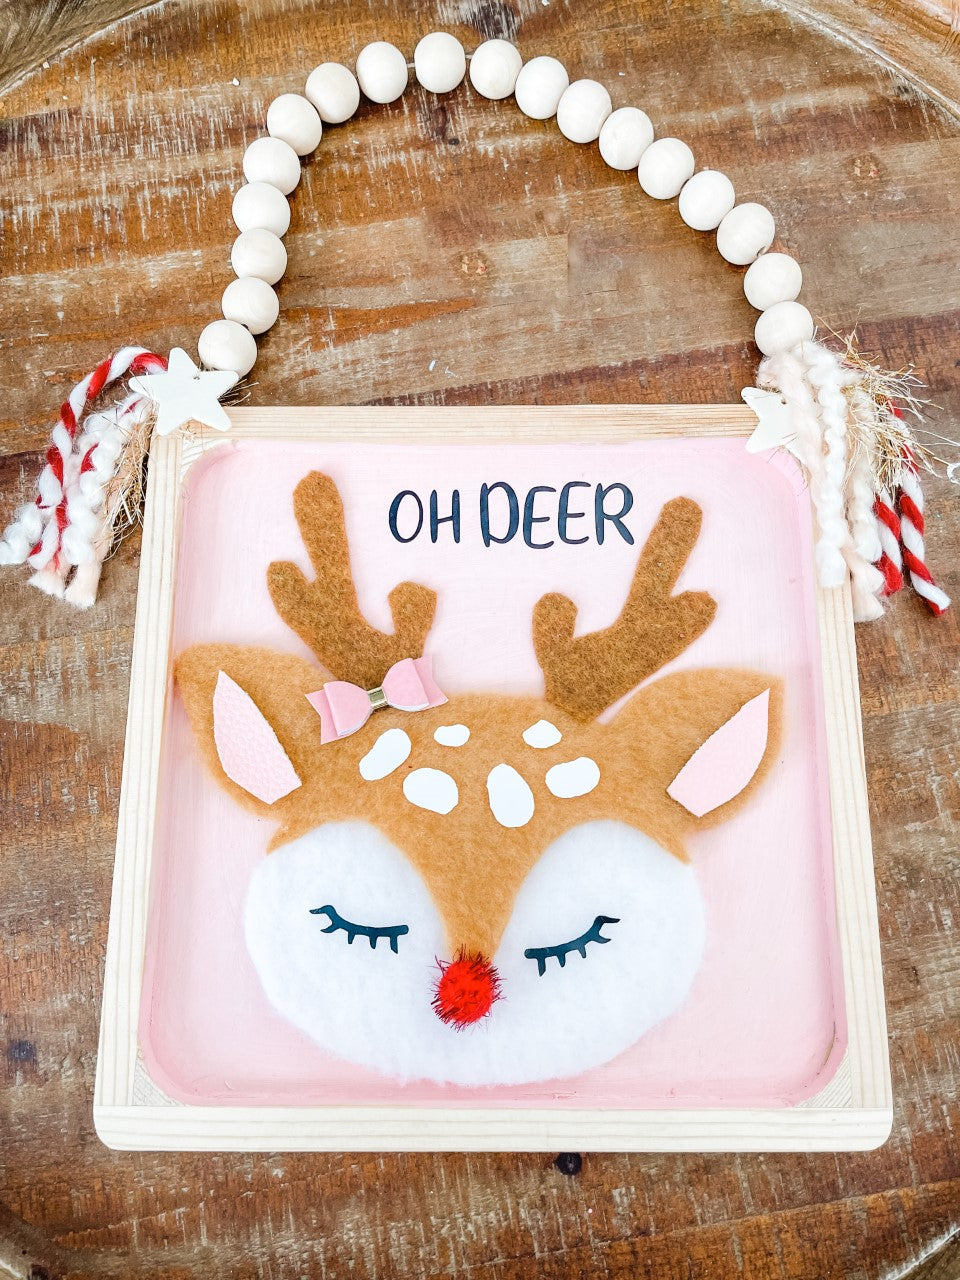 Create Your Own “OH DEER” Wood Board Kit